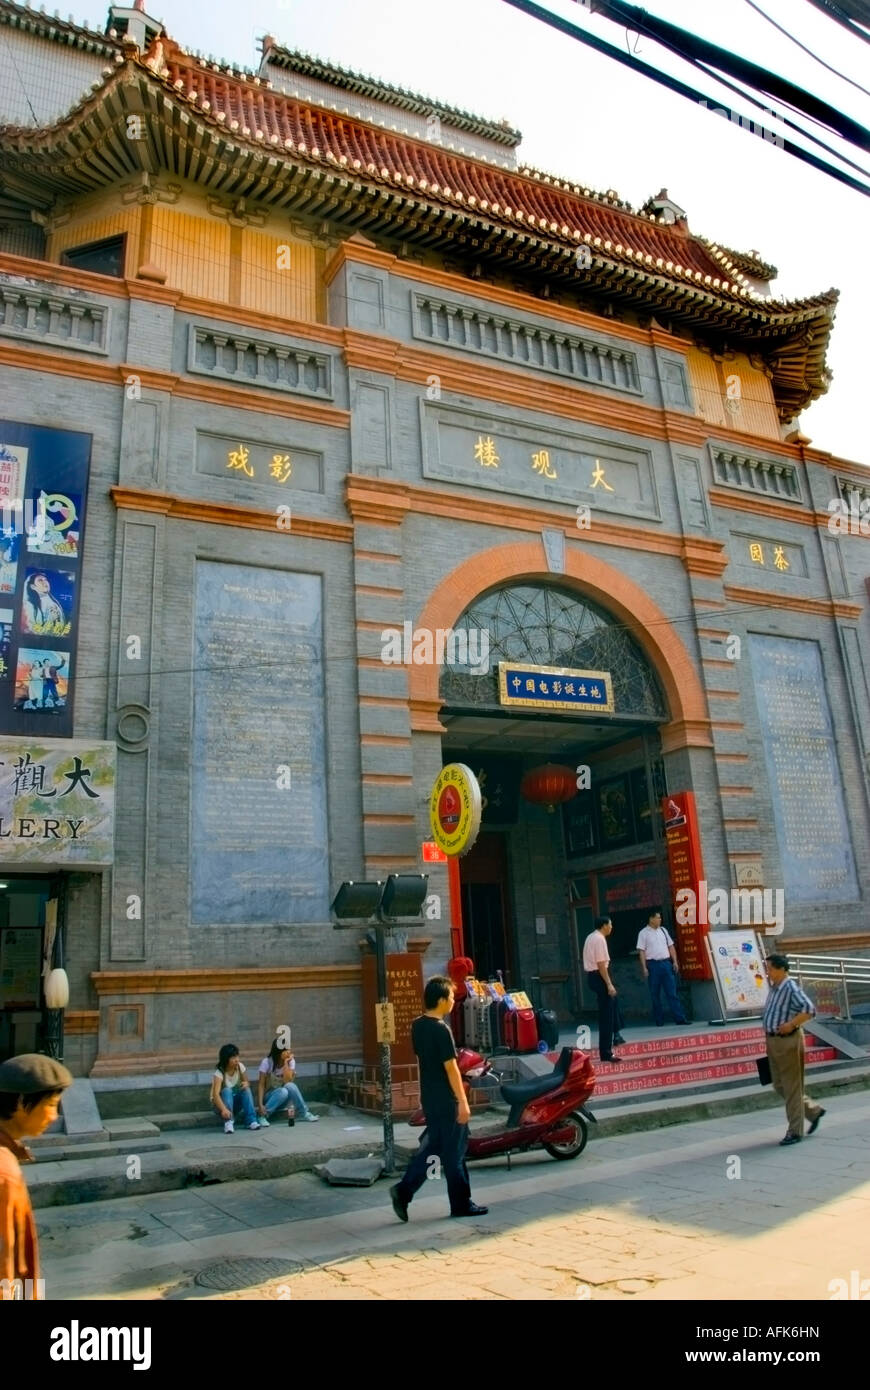 Beijing CHINA, Chinese movie theater exterior Dazhalan Jie Street ,Beijing's First Cinema Cafe, The Daguanlou, Entrance, vintage movie theater, Old Stock Photo